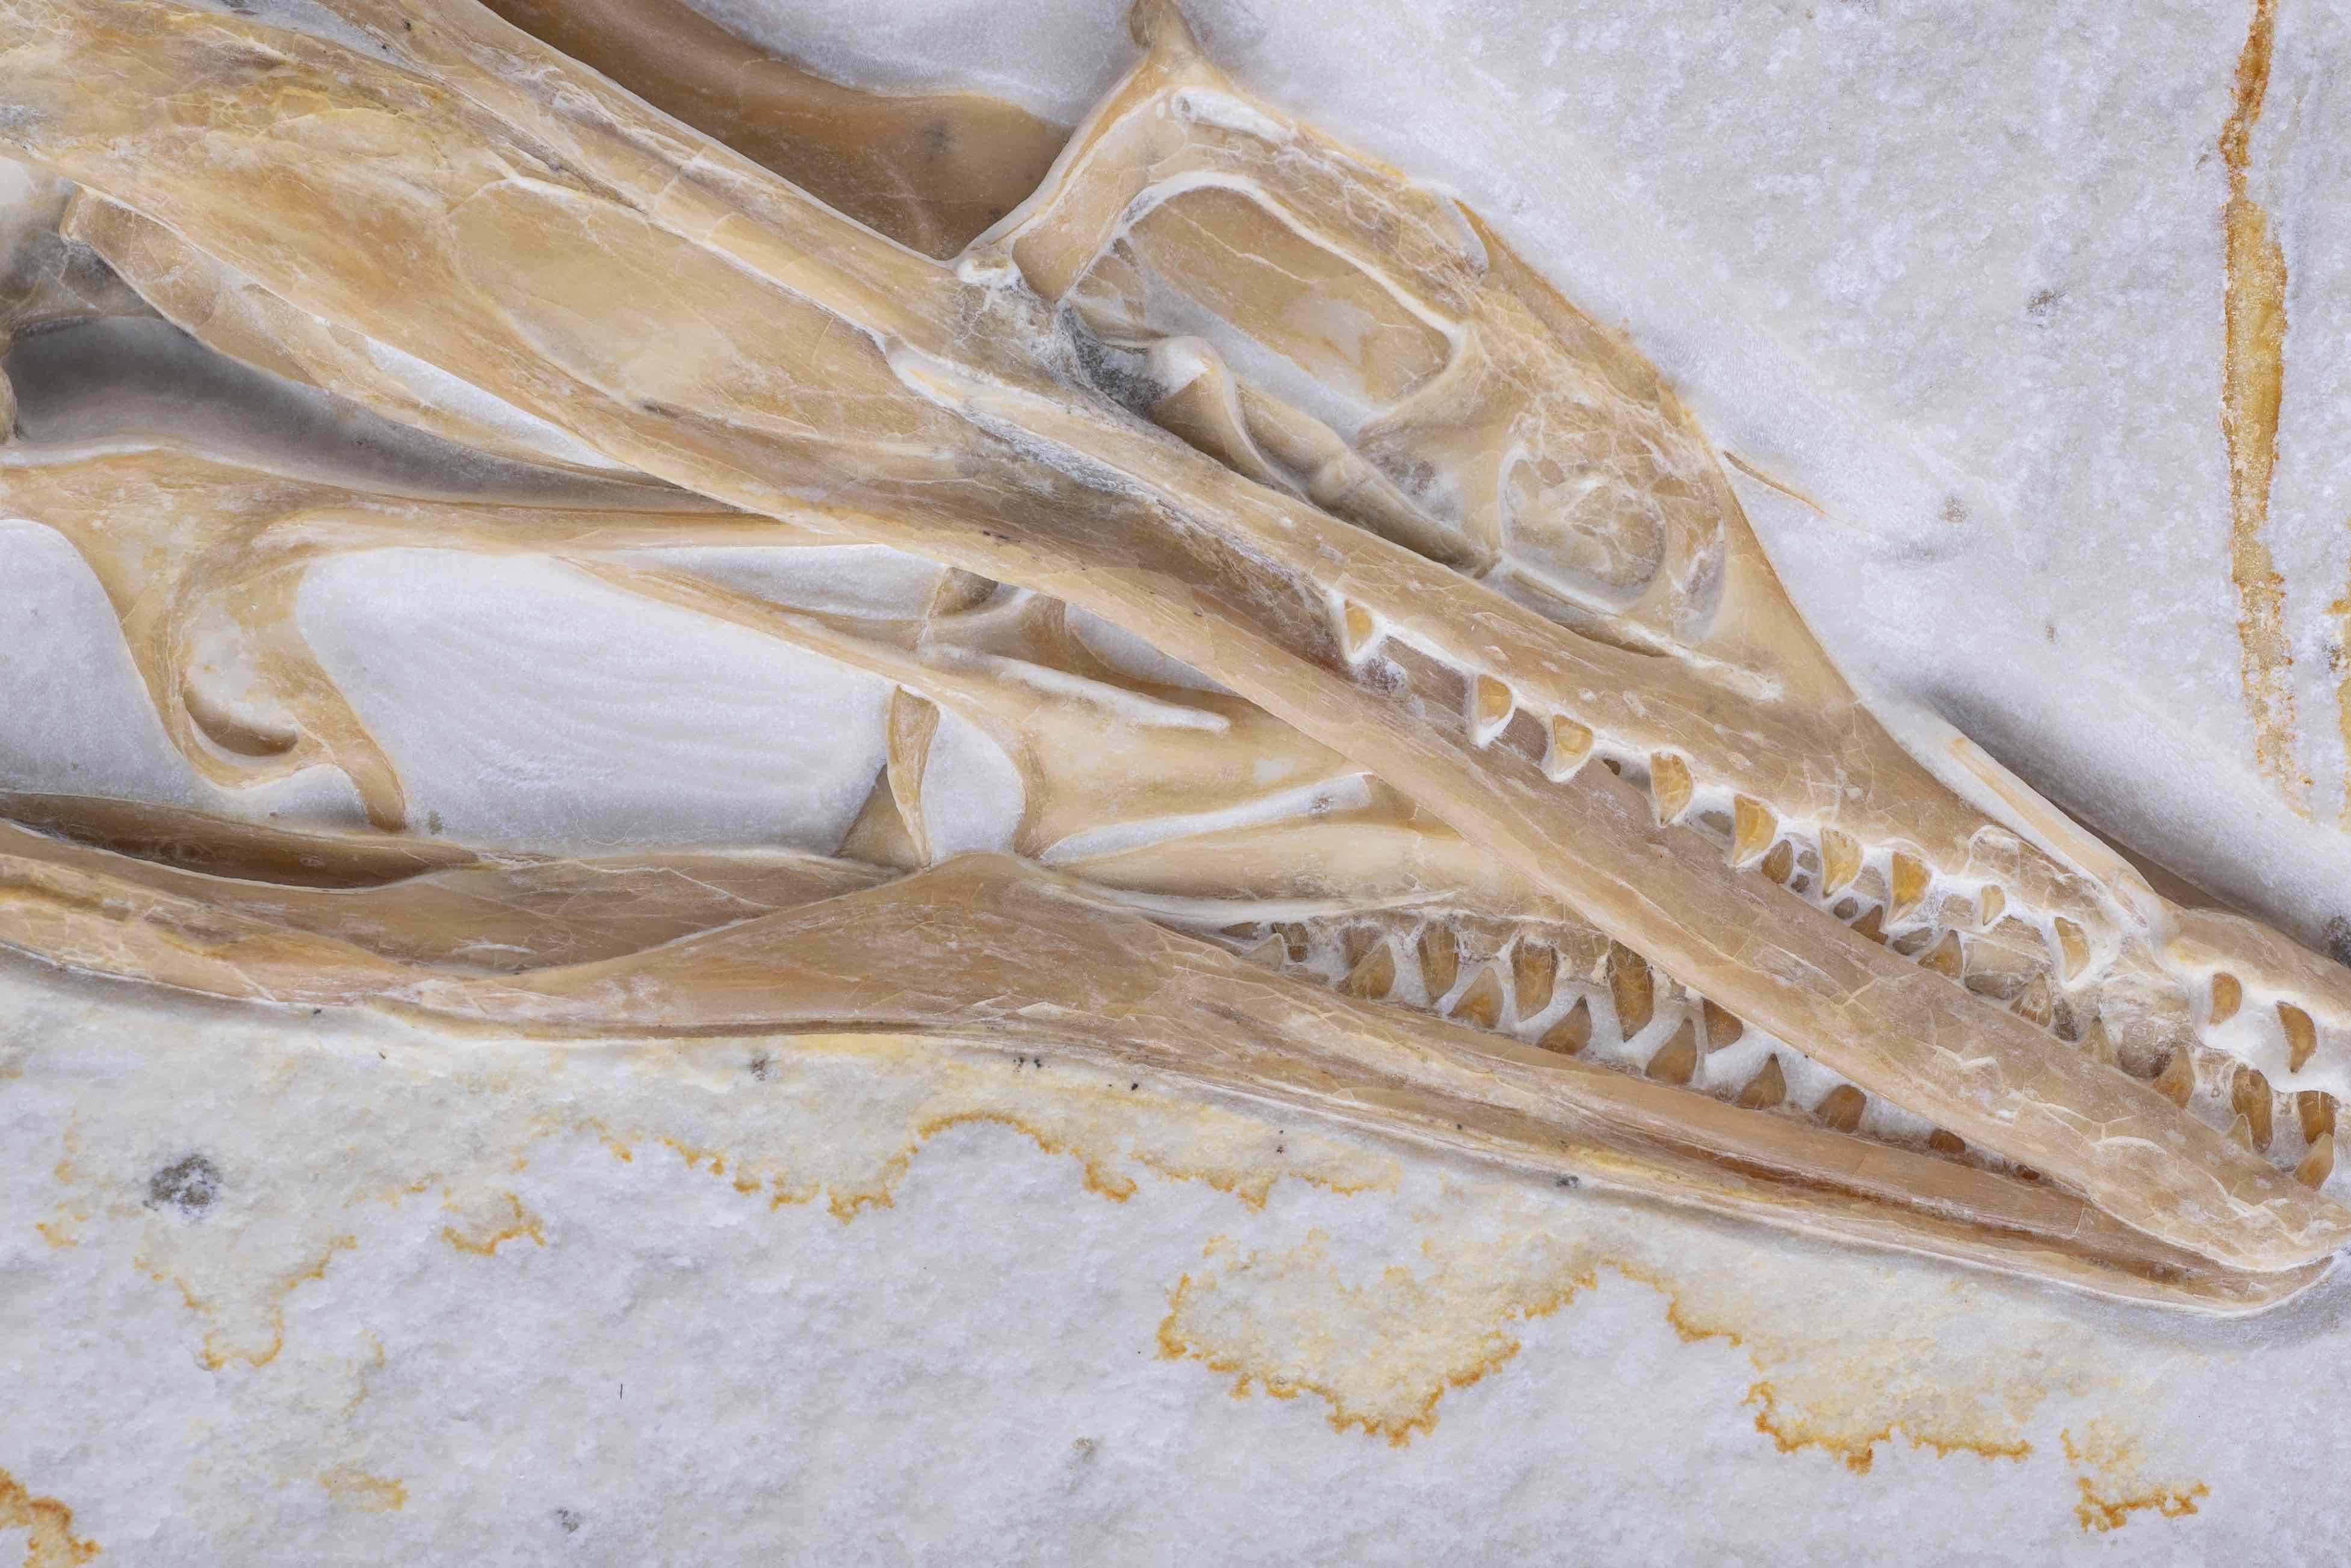 A closeup of the Chicago Archaeopteryx skull. (Courtesy of Field Museum of Natural History)